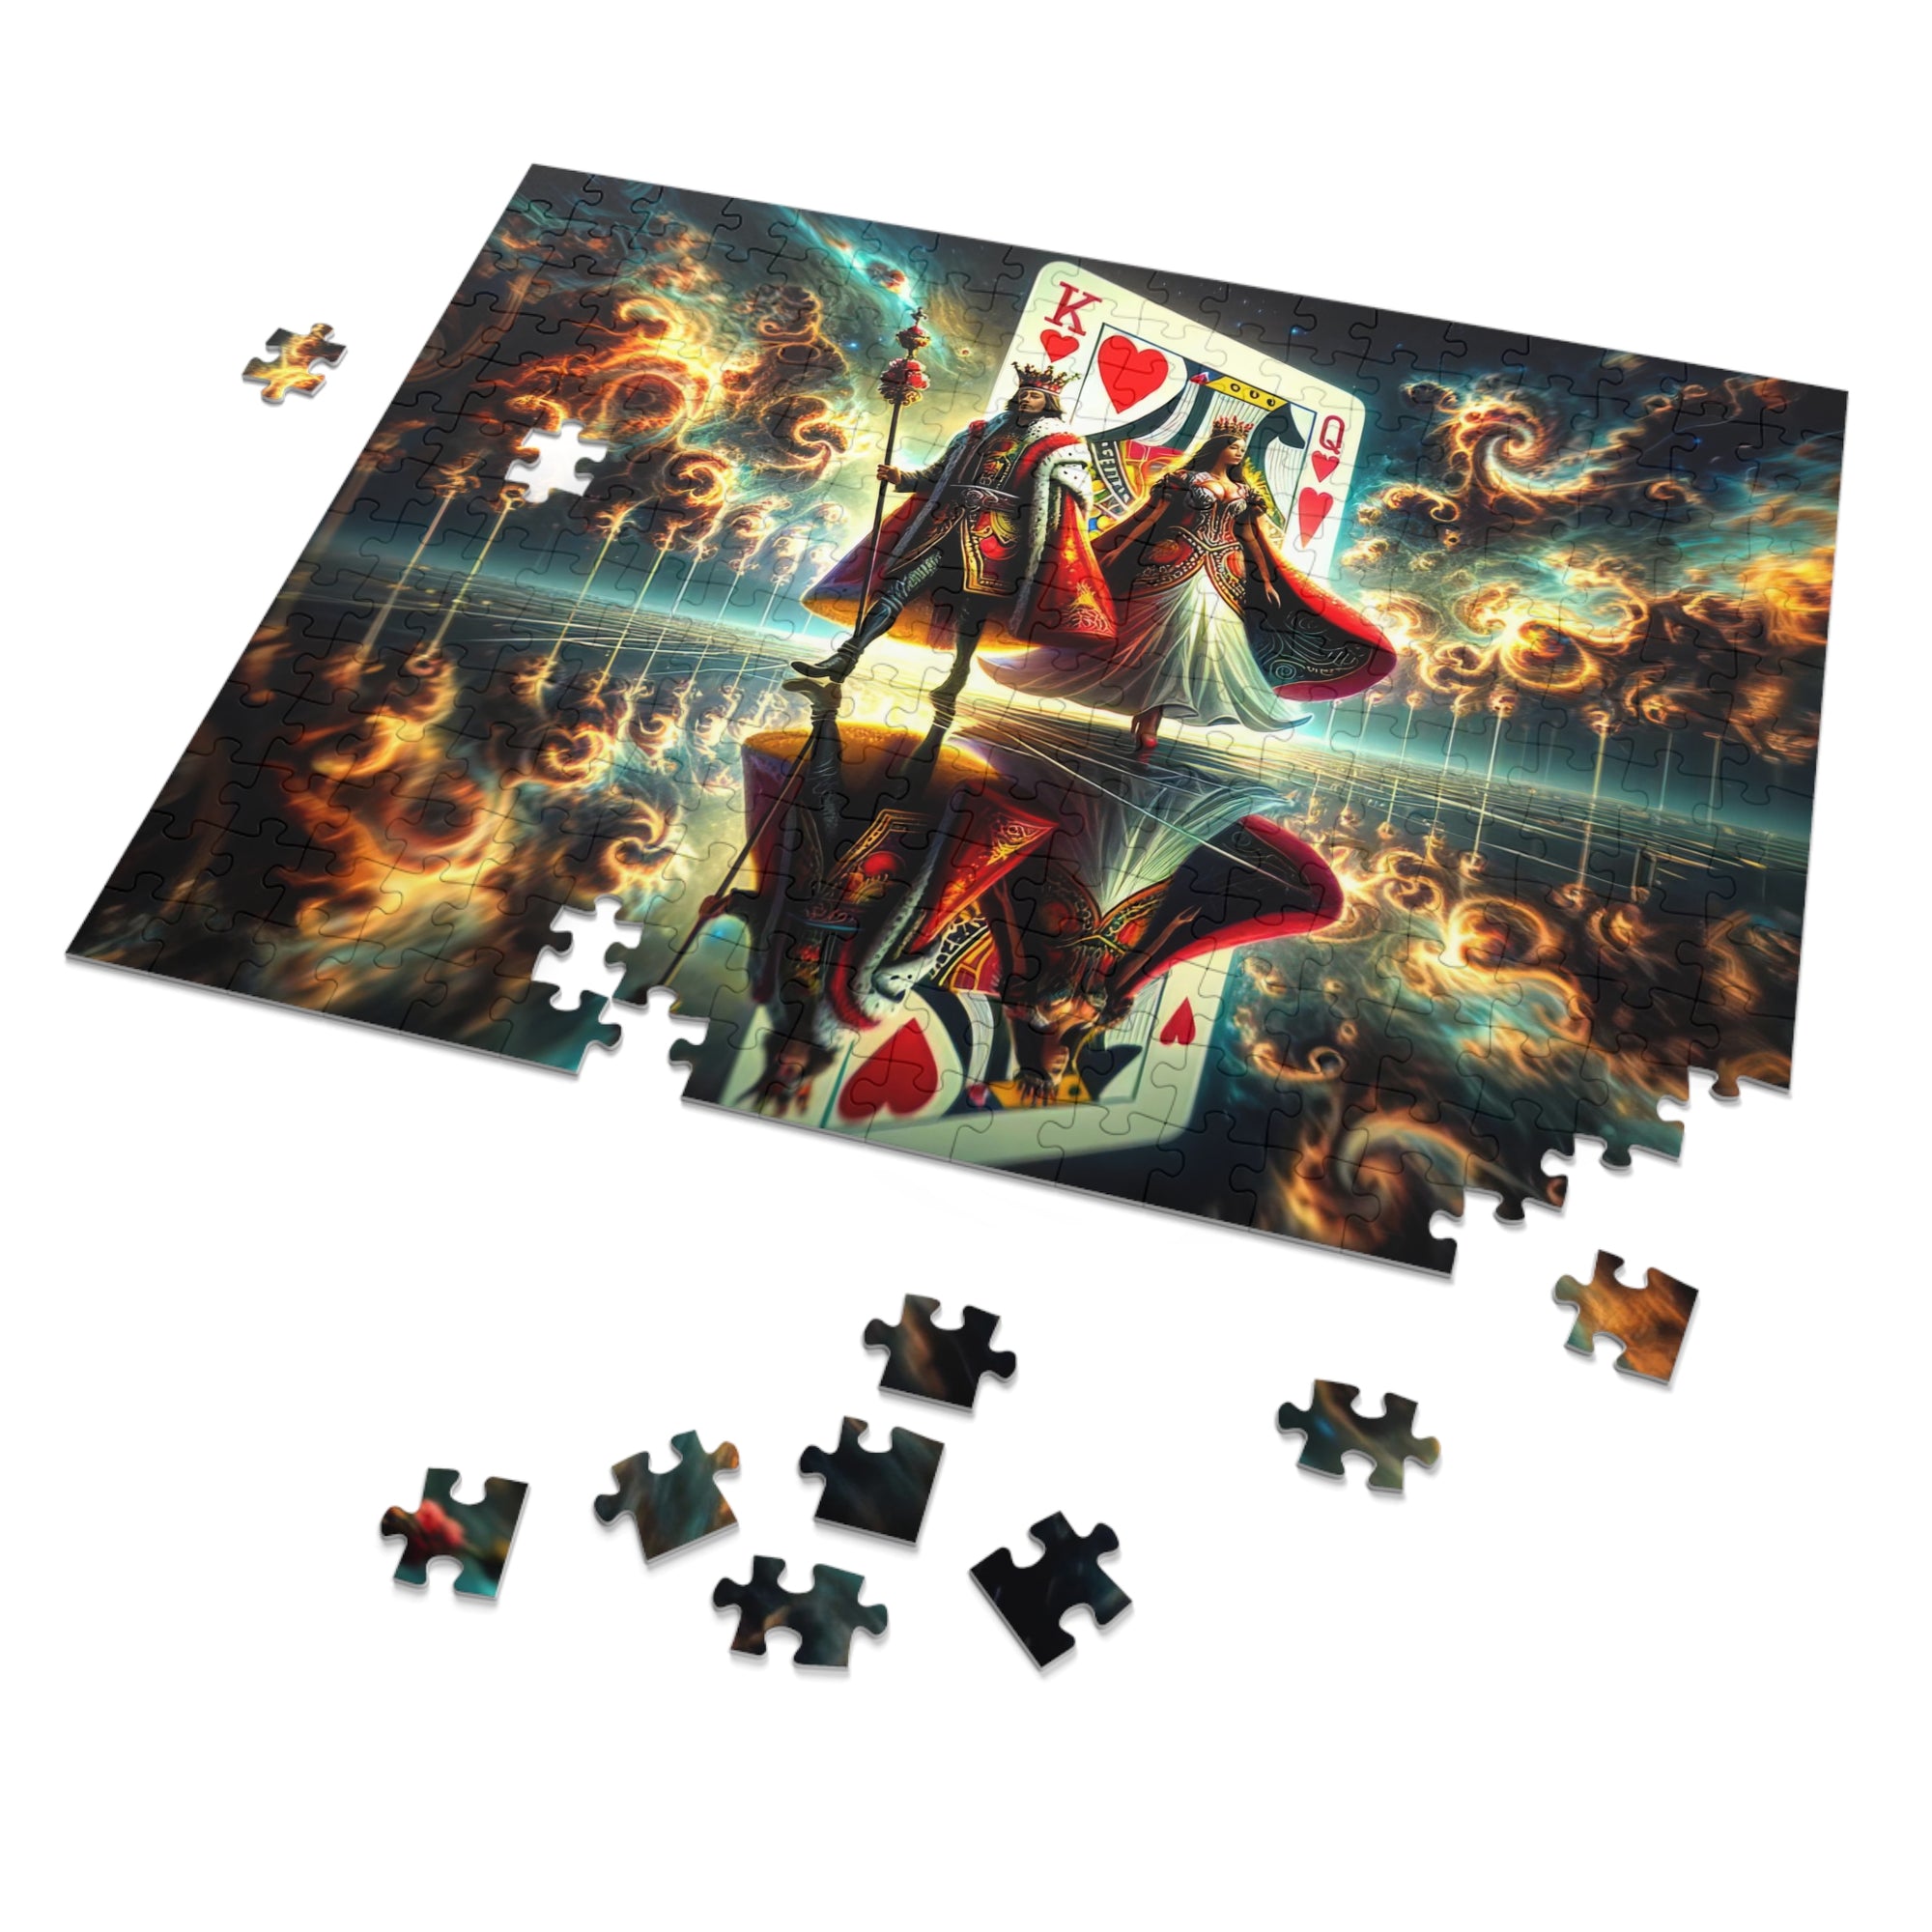 The King and Queen of Infinity Puzzle